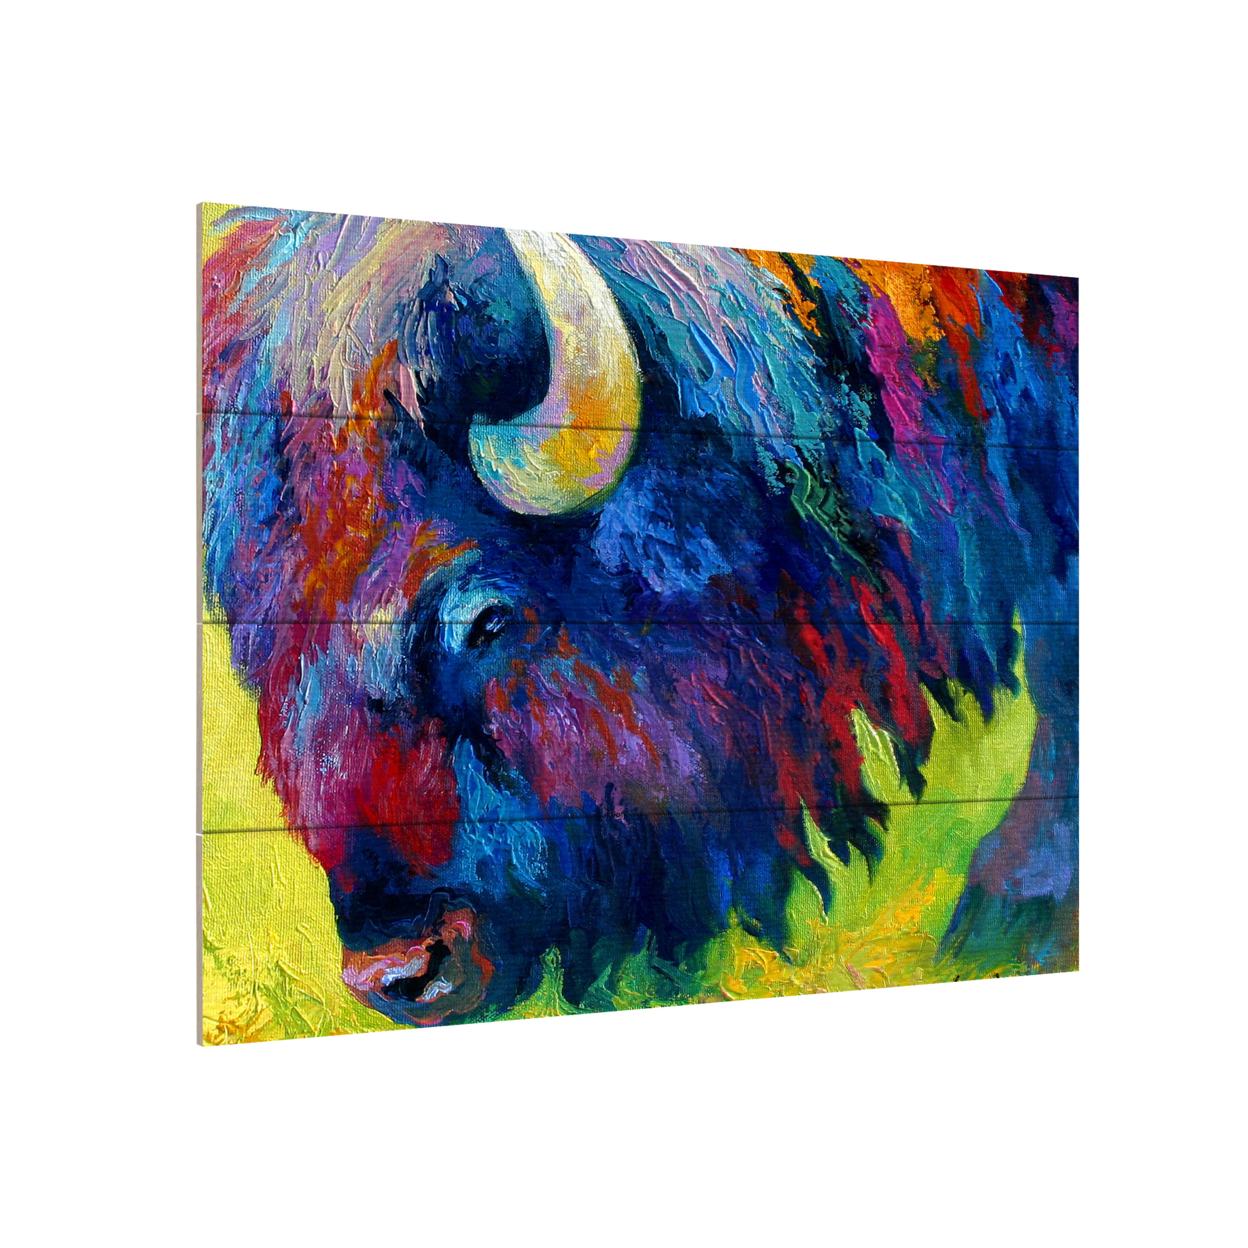 Wall Art 12 X 16 Inches Titled Bison Portrait II Ready To Hang Printed On Wooden Planks